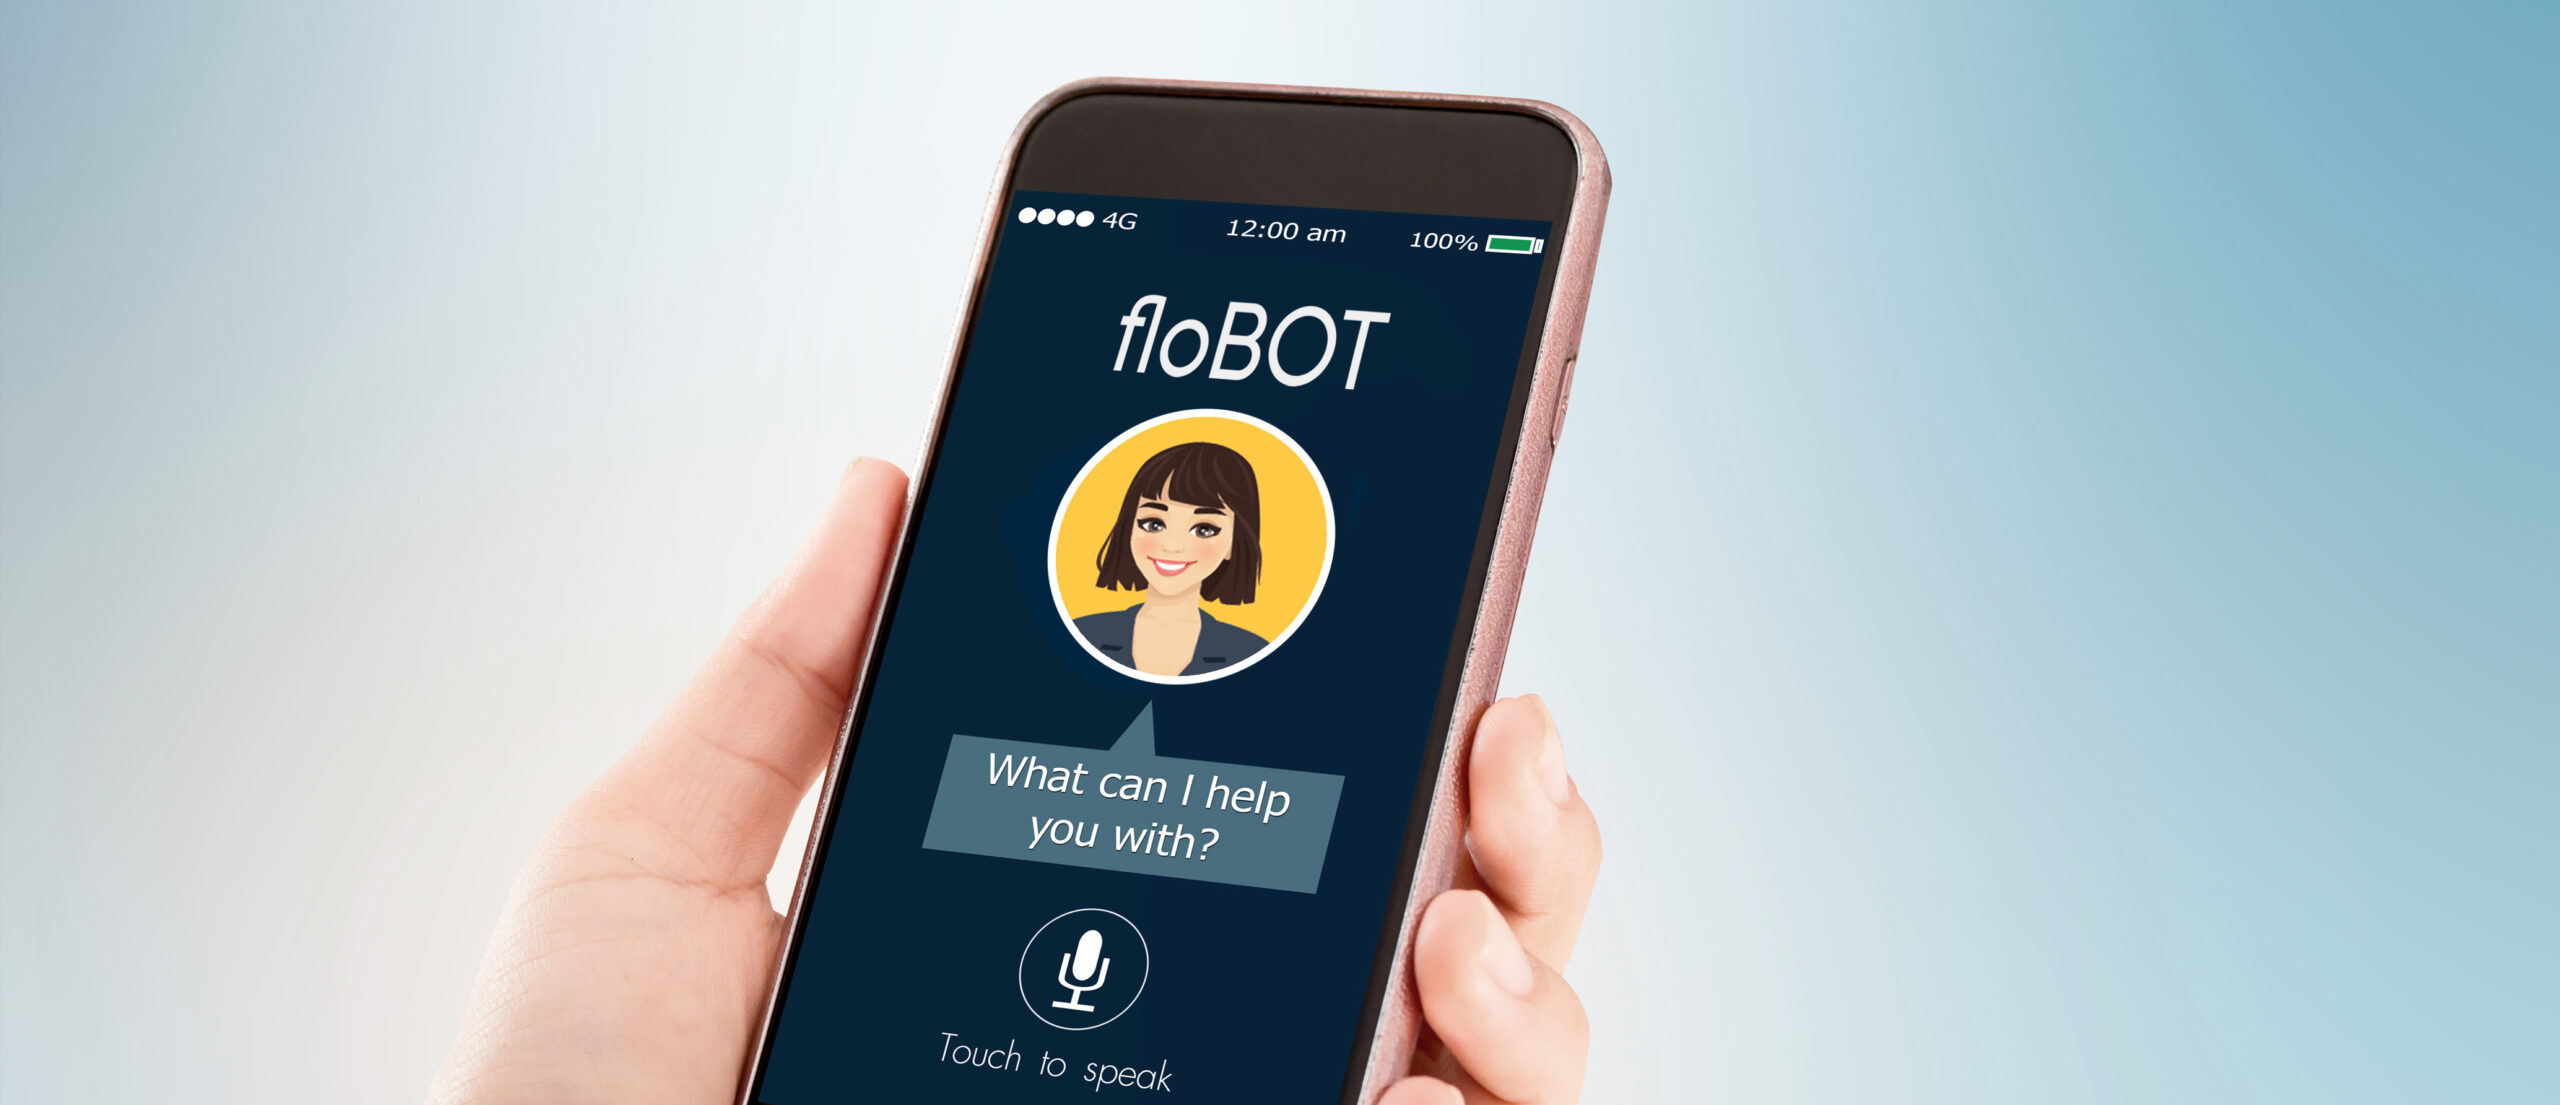 A hand holding a smartphone showing the image of floLIVE's new AI chatbot, floBOT.